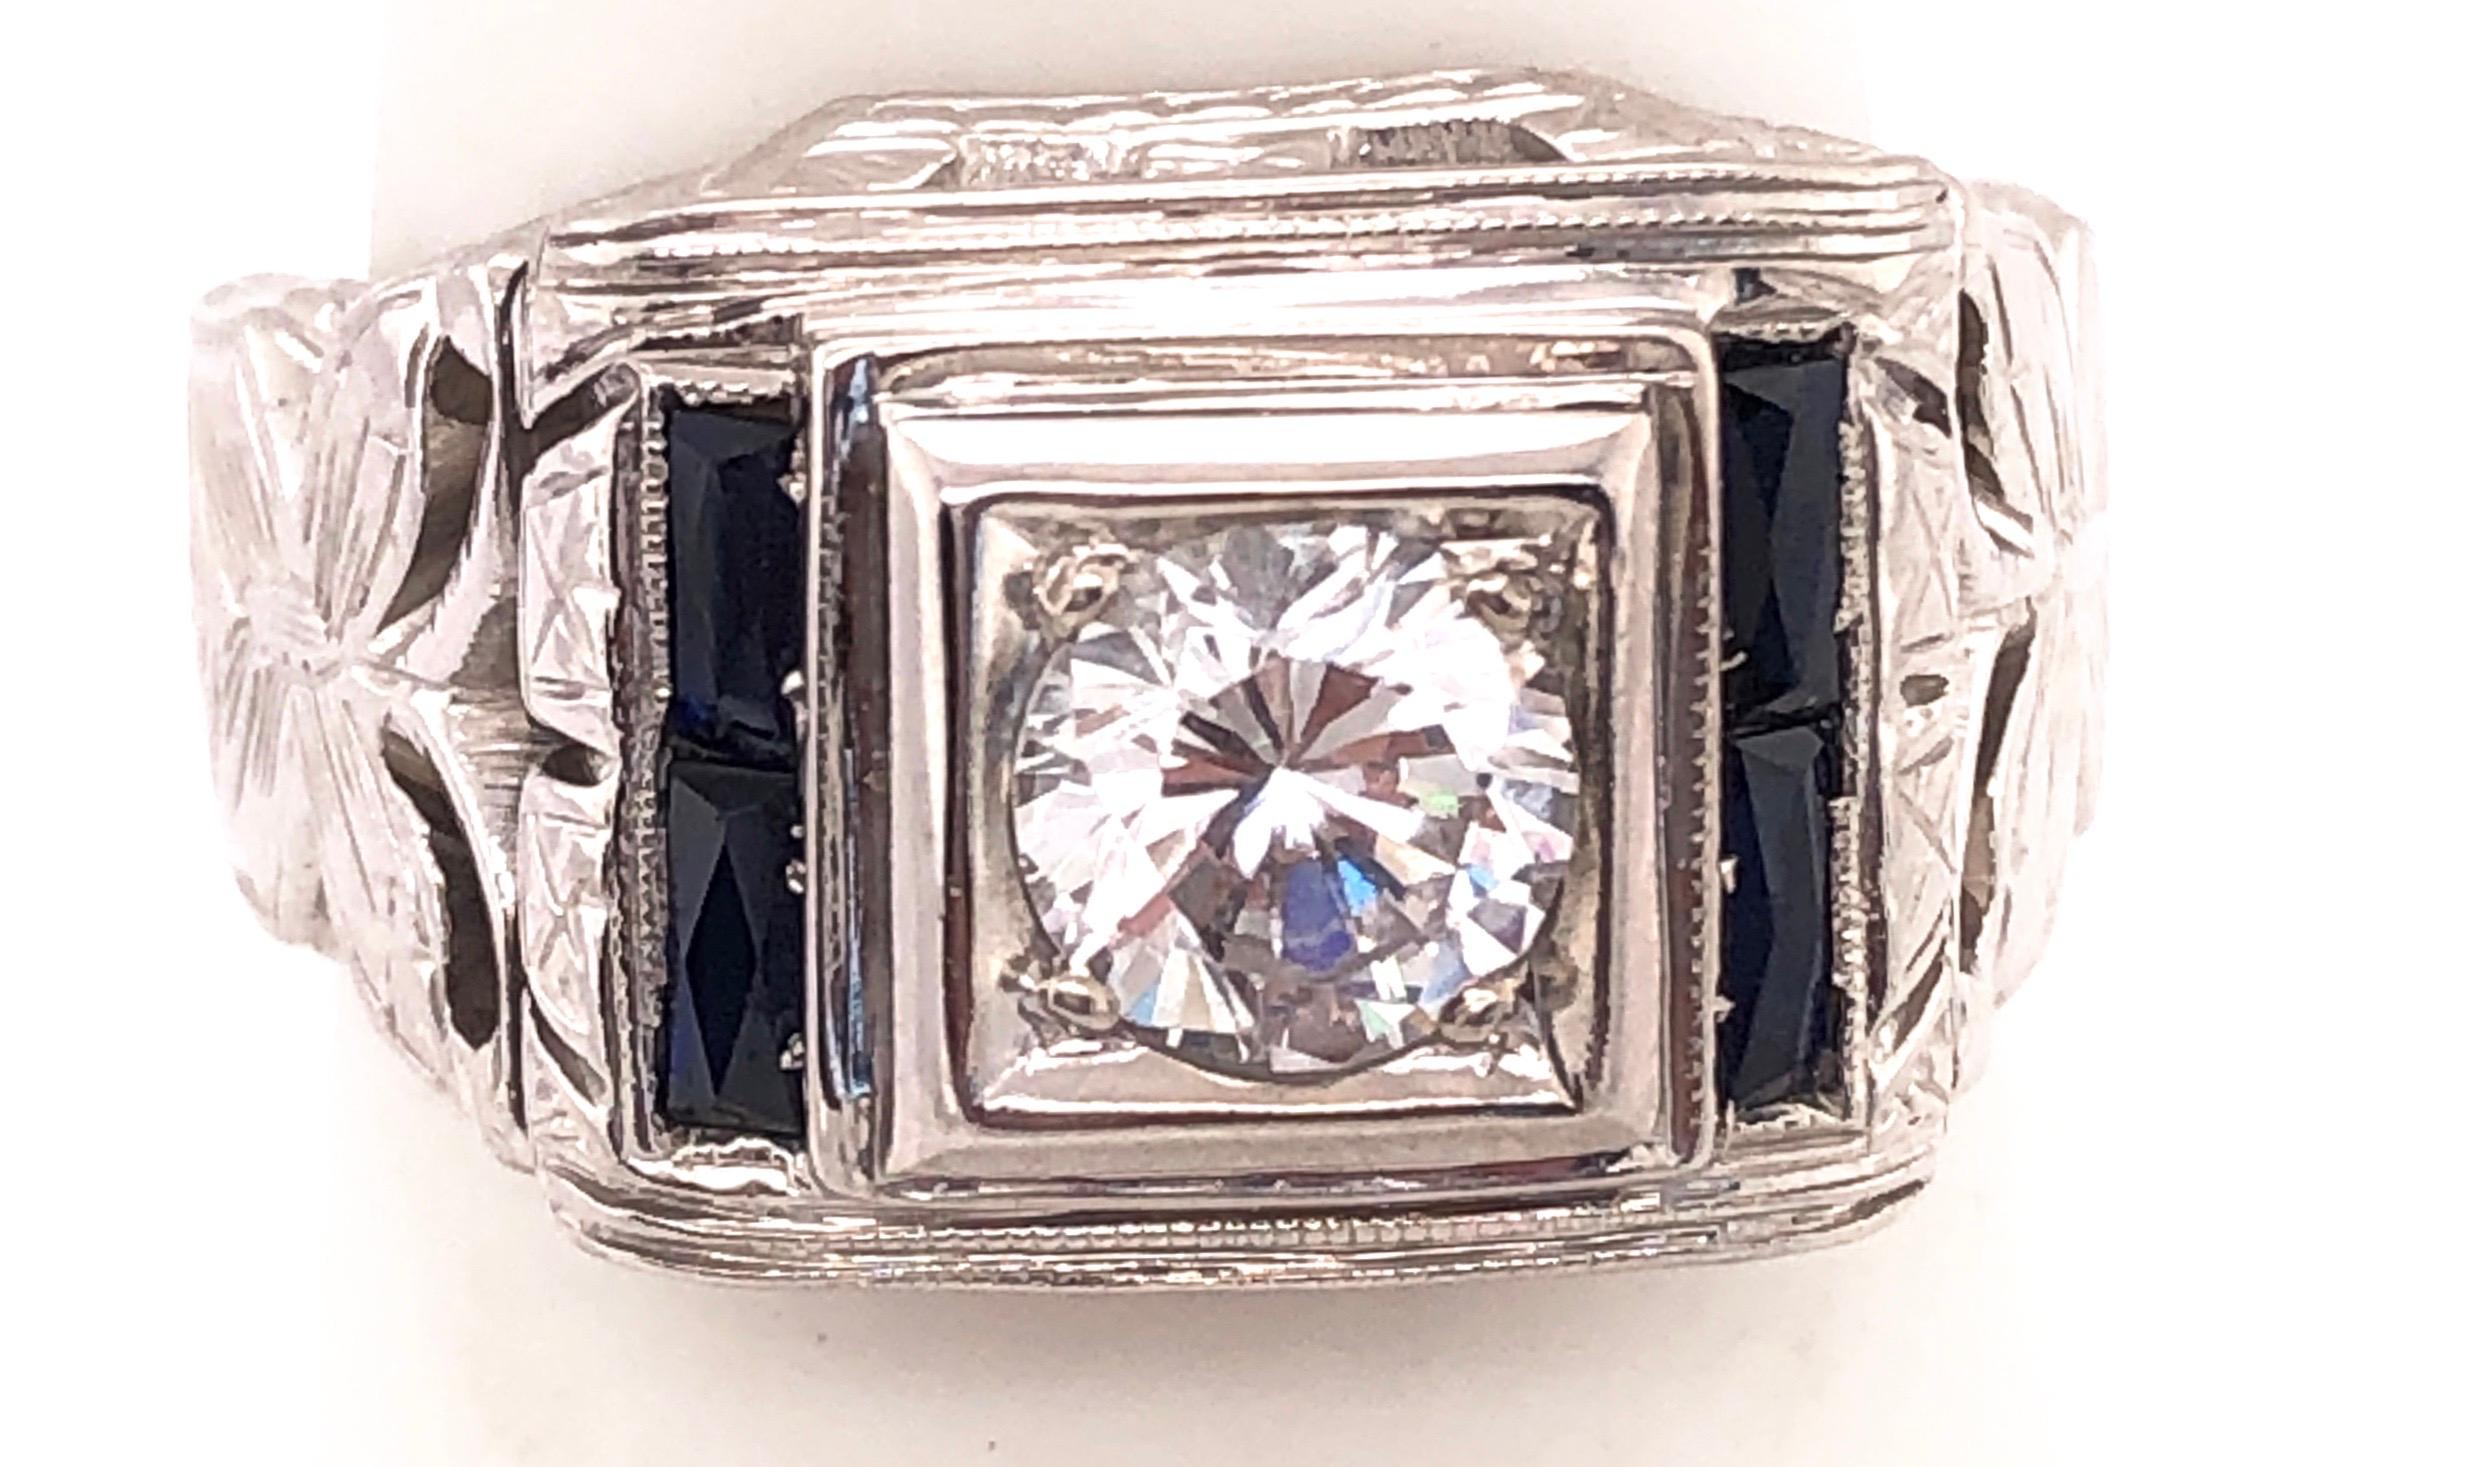 14KT White Gold Fashion Ring with .70 Round Diamond and 4 Sapphires.
Size 7. 8.60 grams total weight.